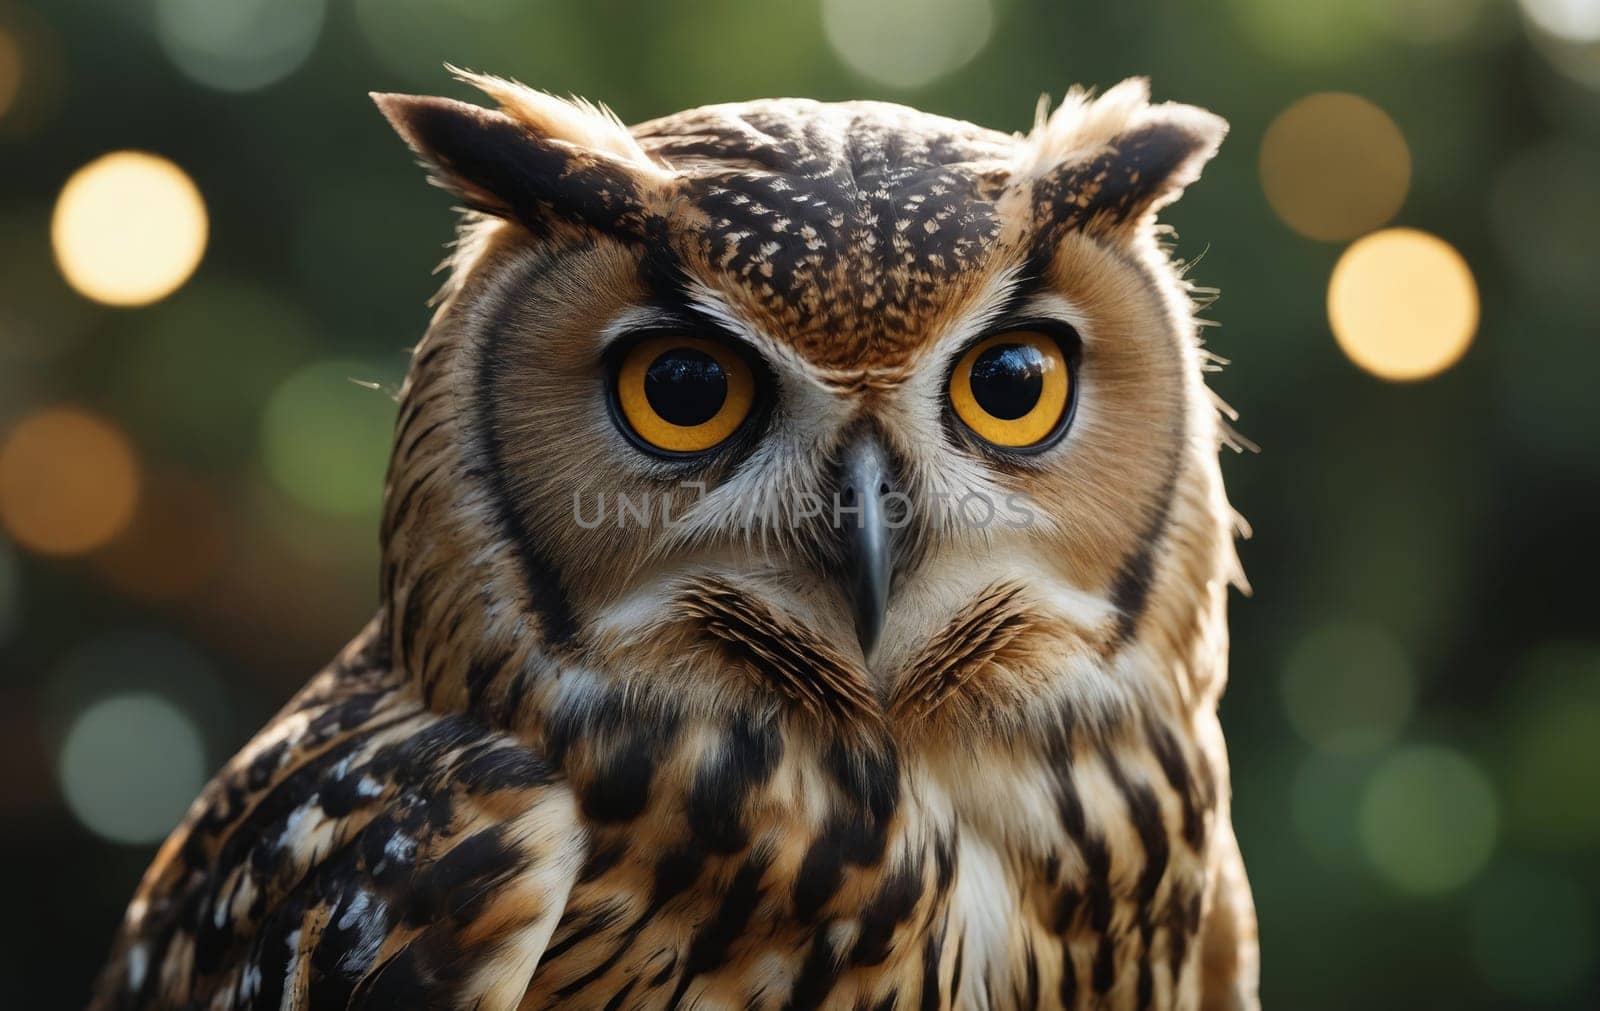 Nature's Enigma: Owl Portraiture under Sparkling Bokeh Lights by Andre1ns